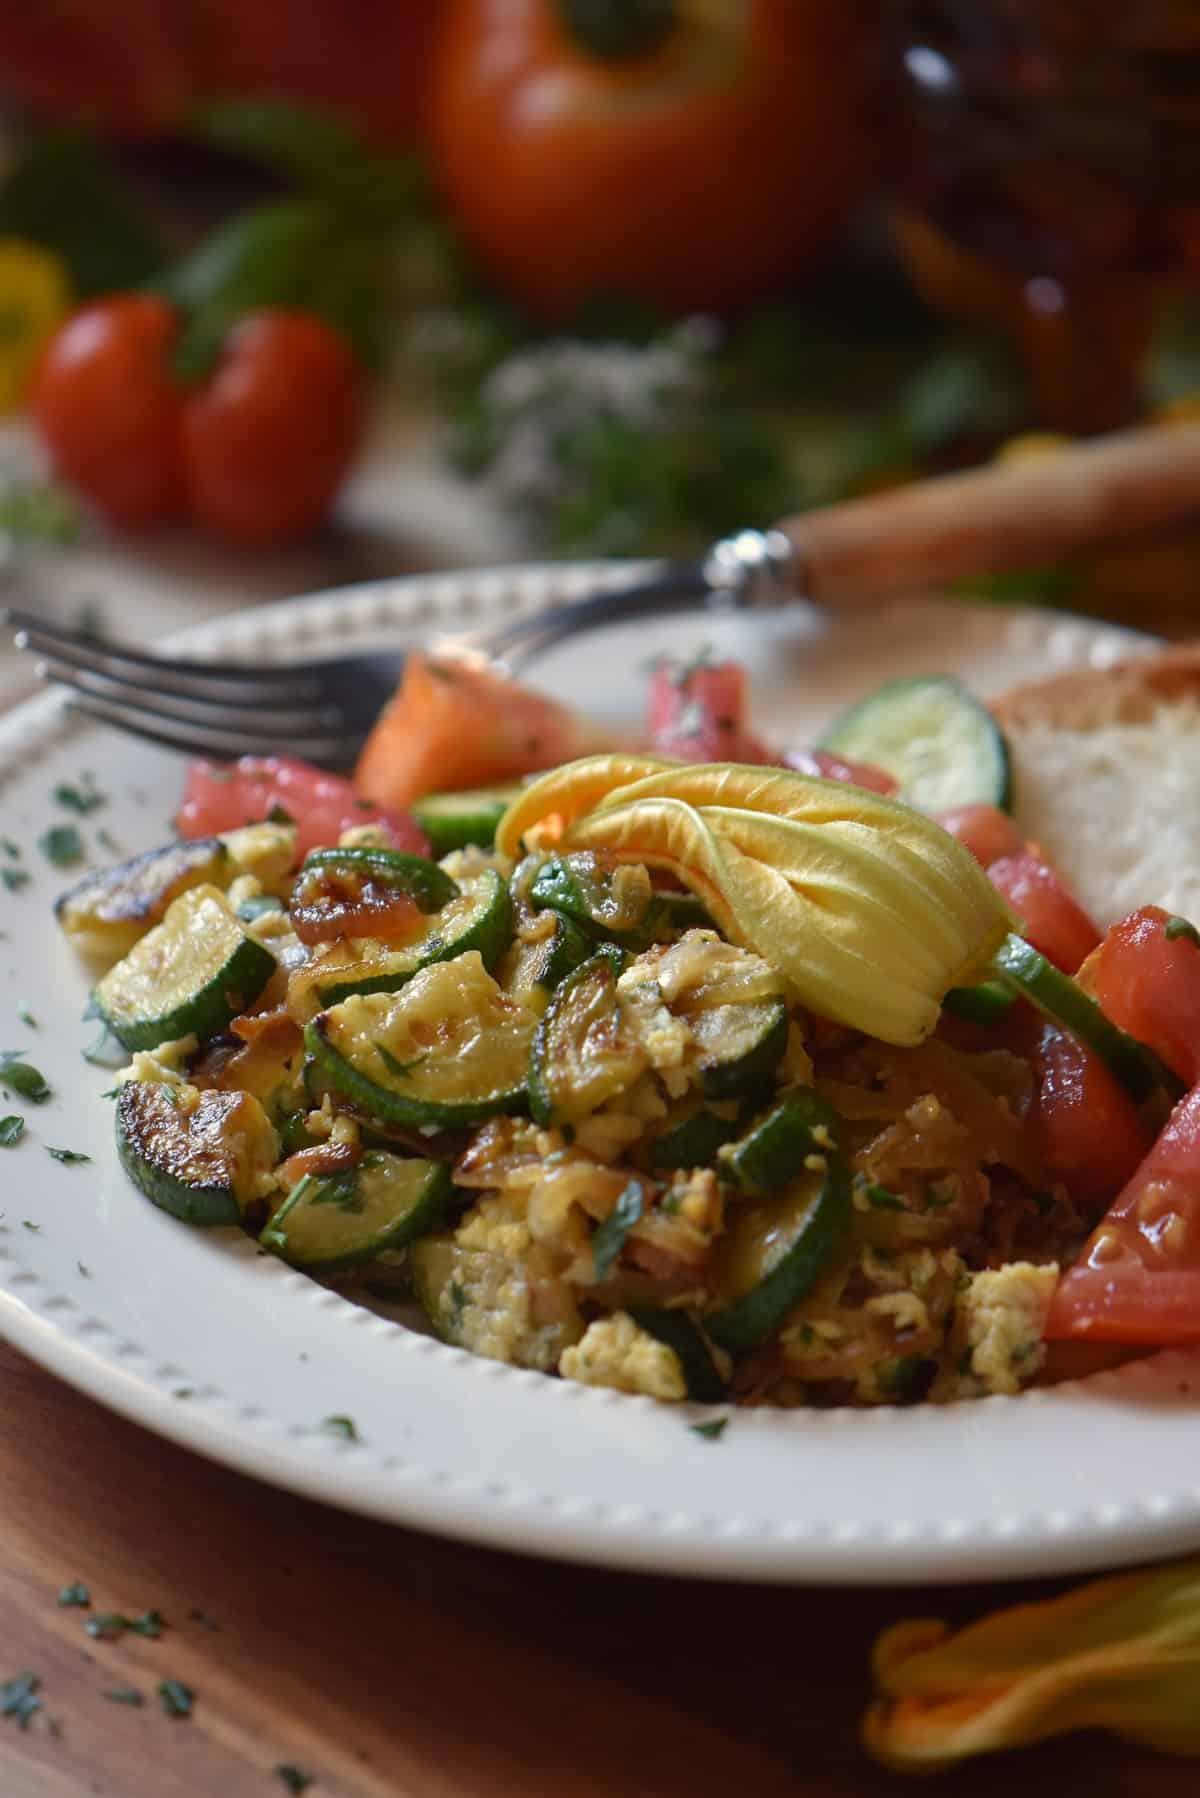 A white plate filled with sauteed zucchini and eggs.